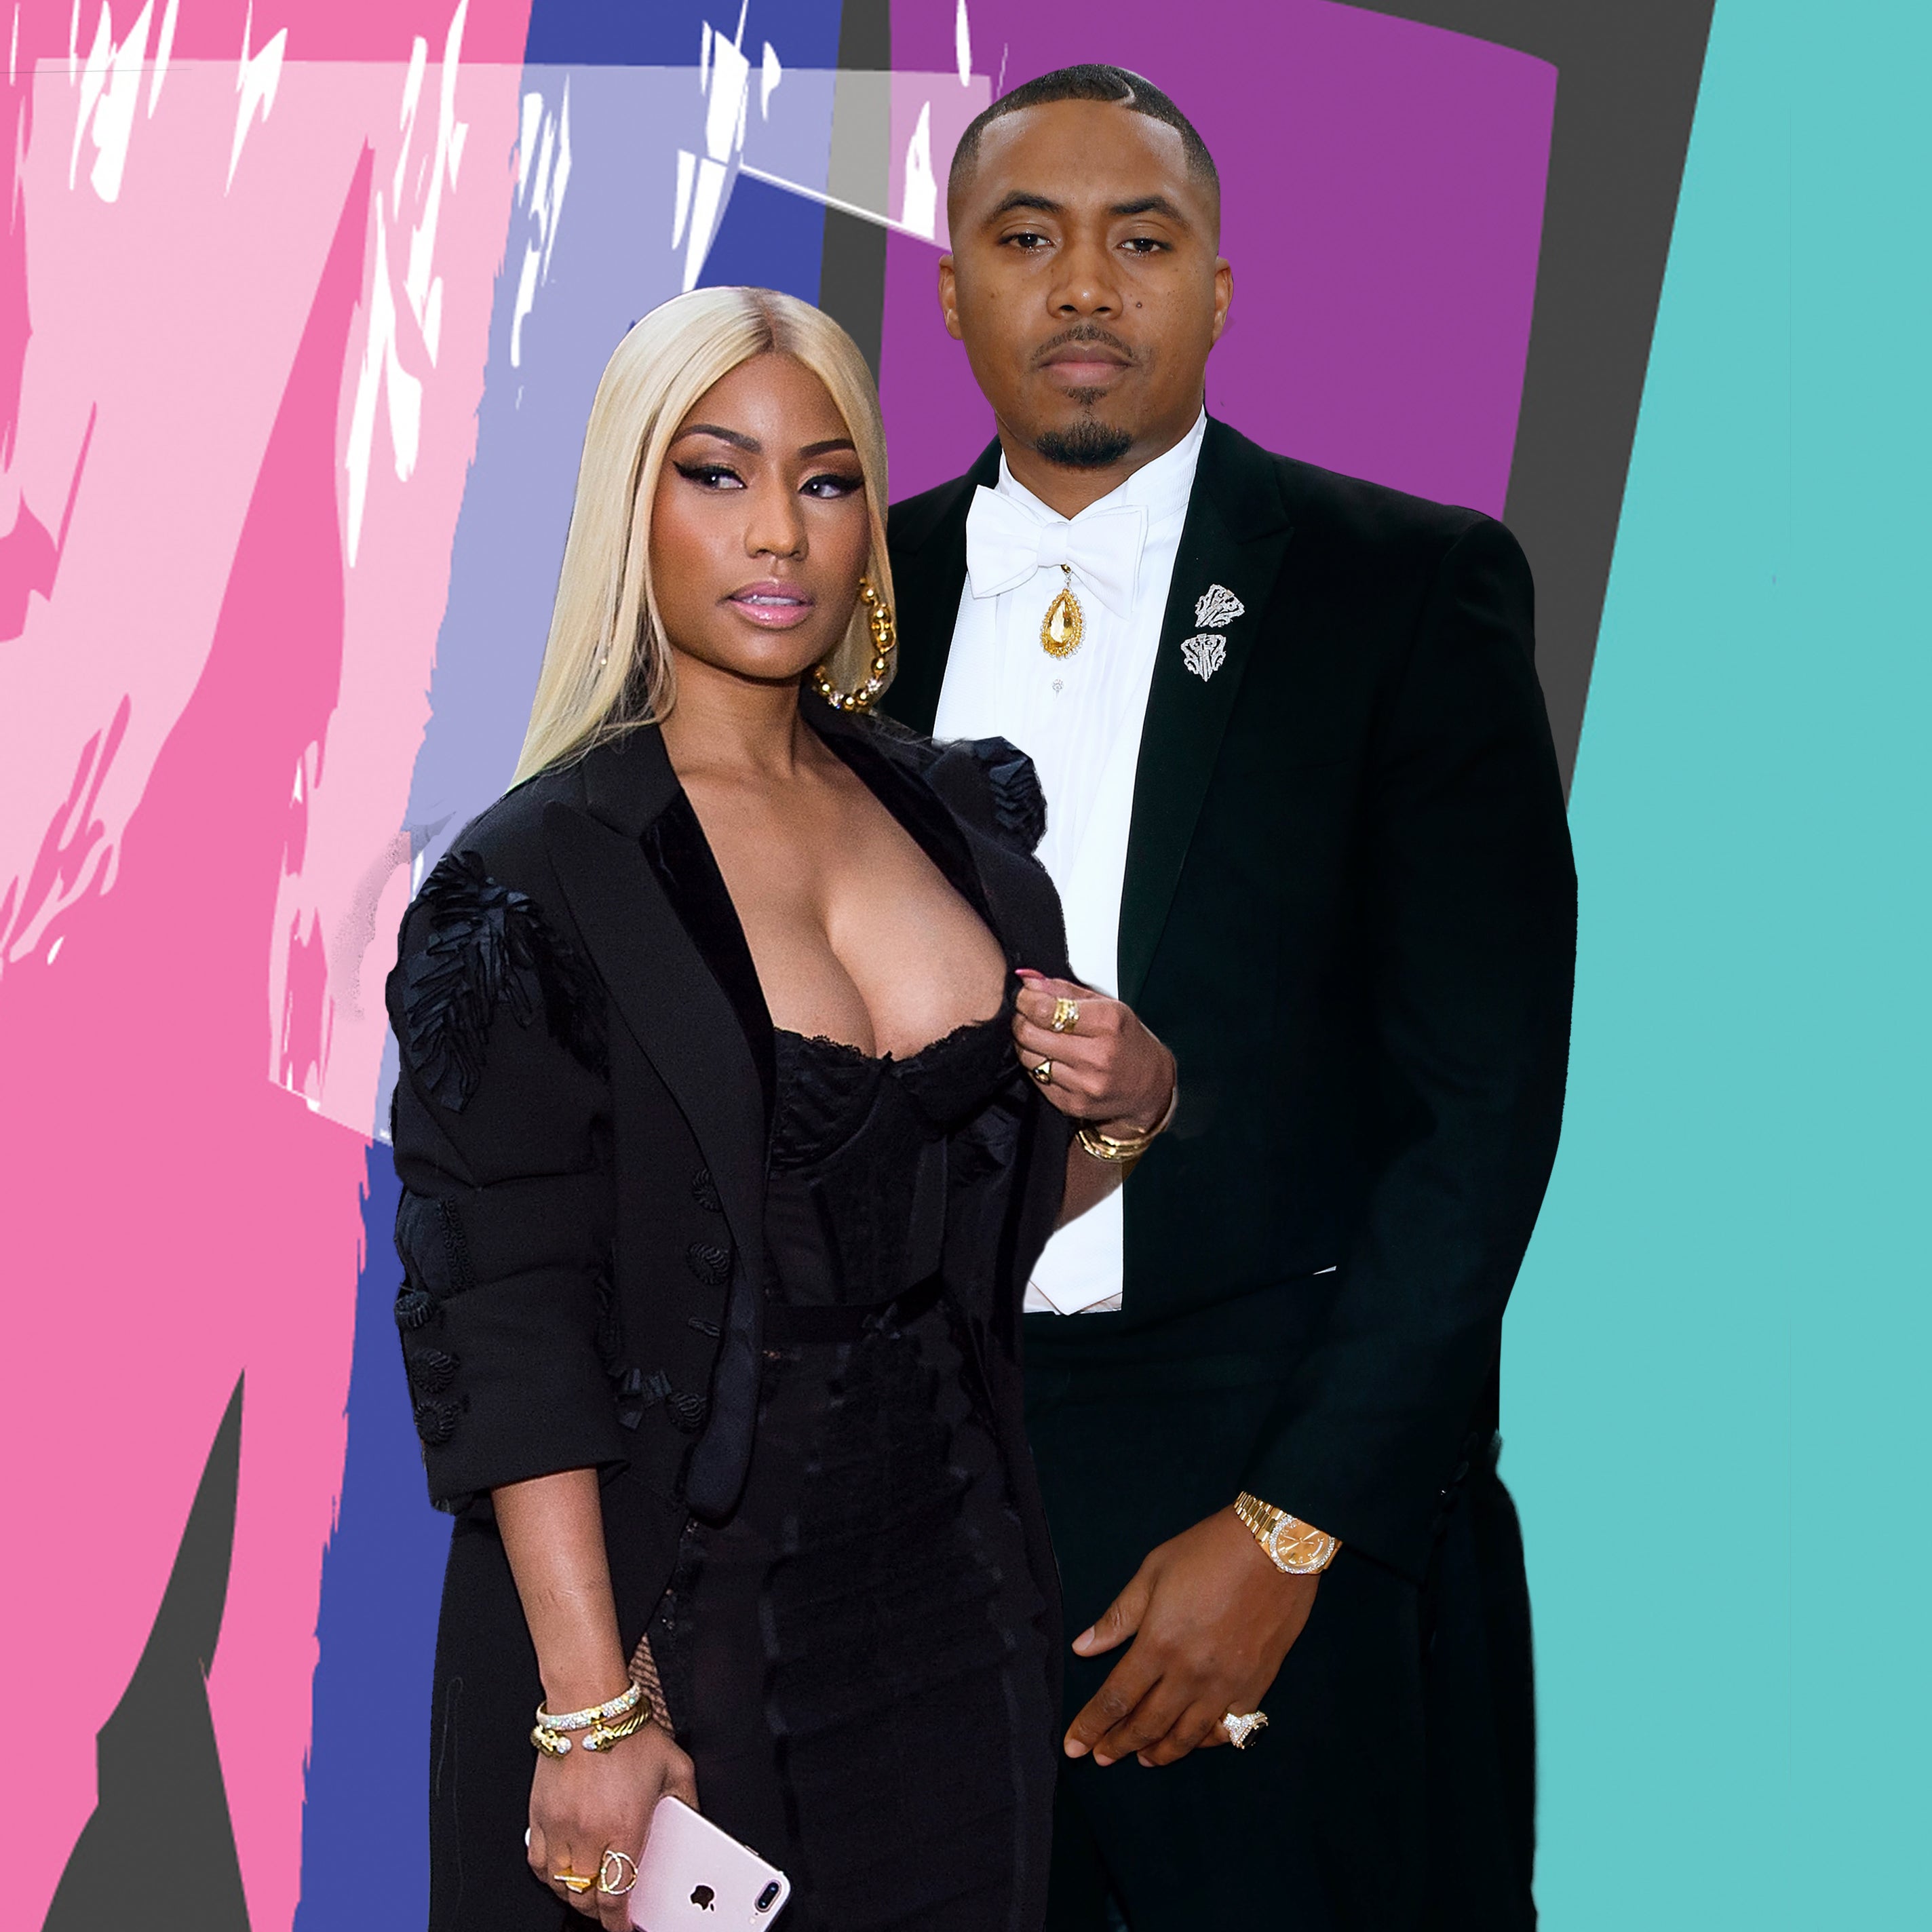 Are They or Aren't They? Nicki Minaj And Nas Cuddle Up For His 44th Birthday
